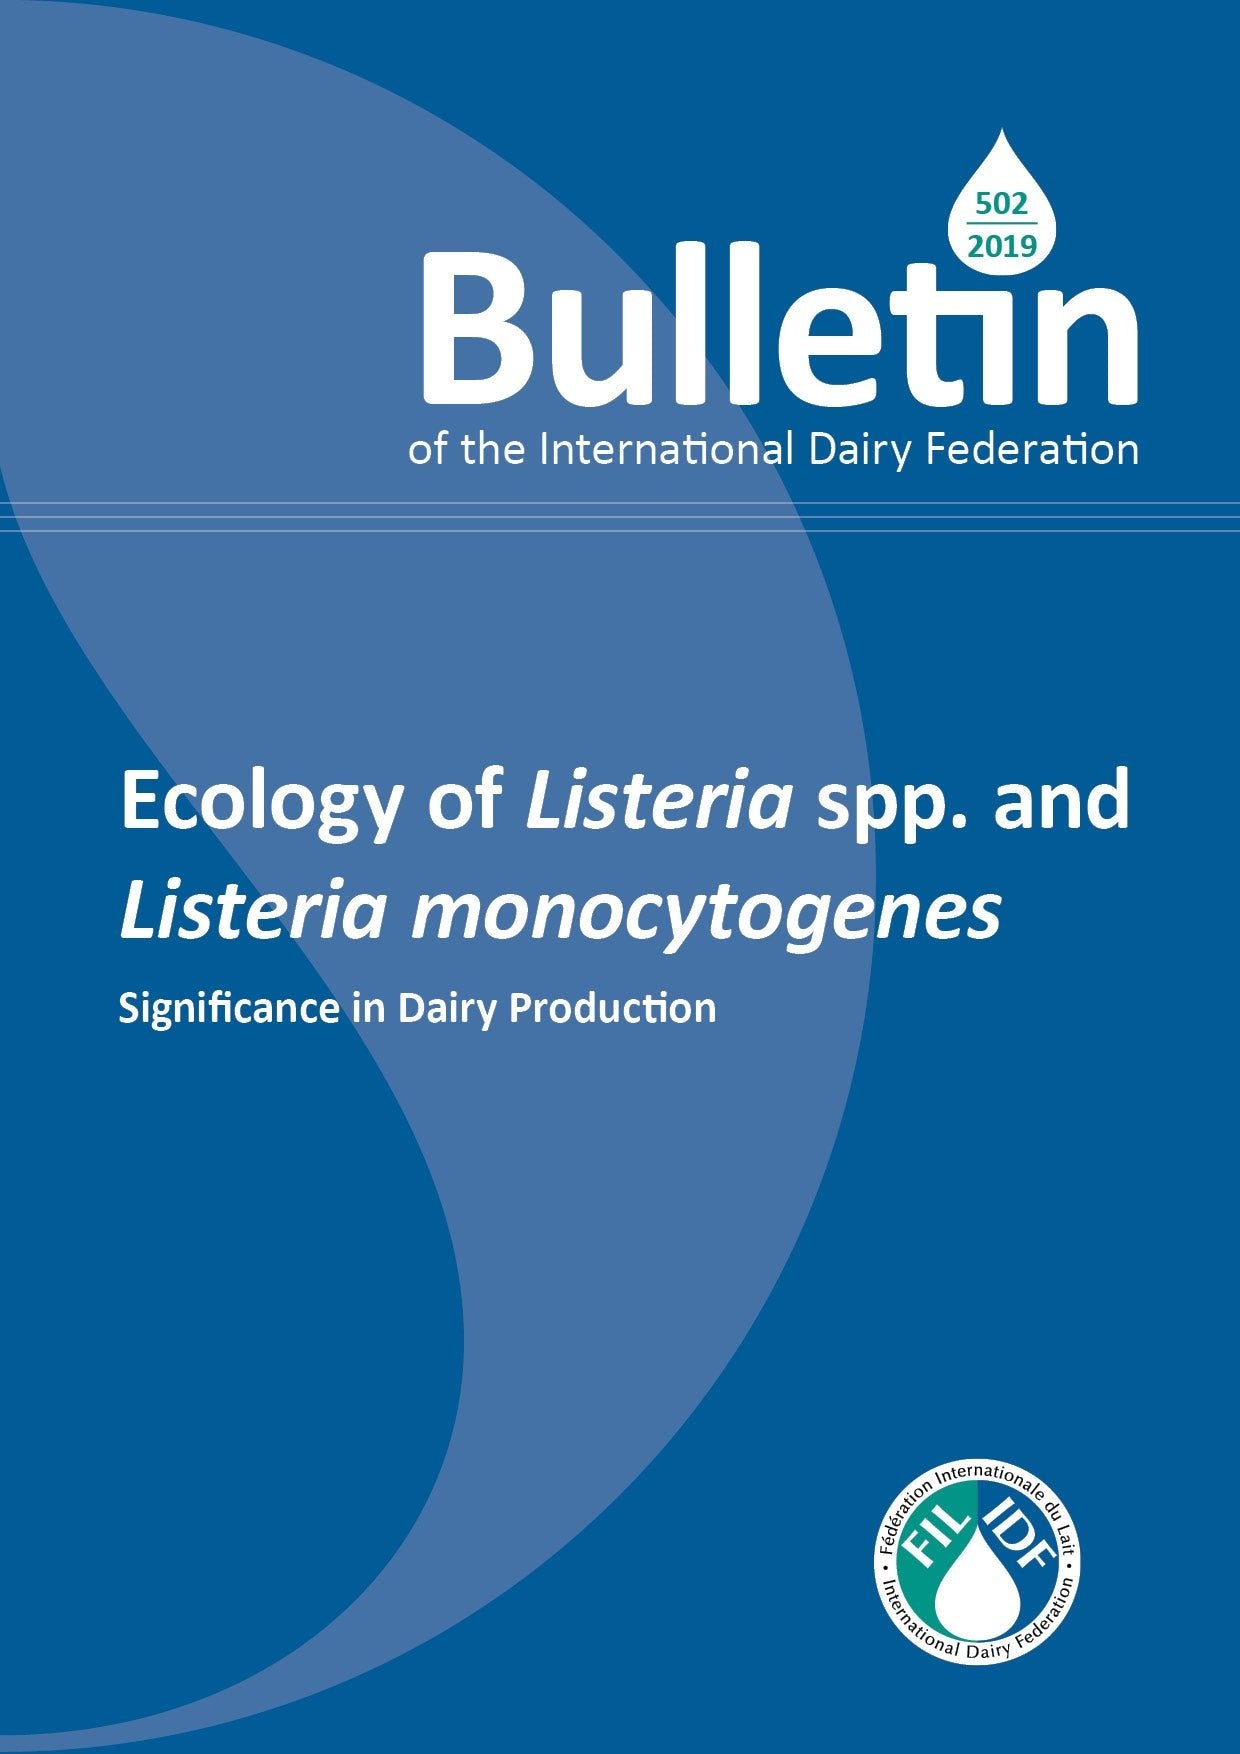 Bulletin of the IDF N° 502/ 2019: Ecology of Listeria spp. and Listeria monocytogenes, Significance in Dairy Production - FIL-IDF